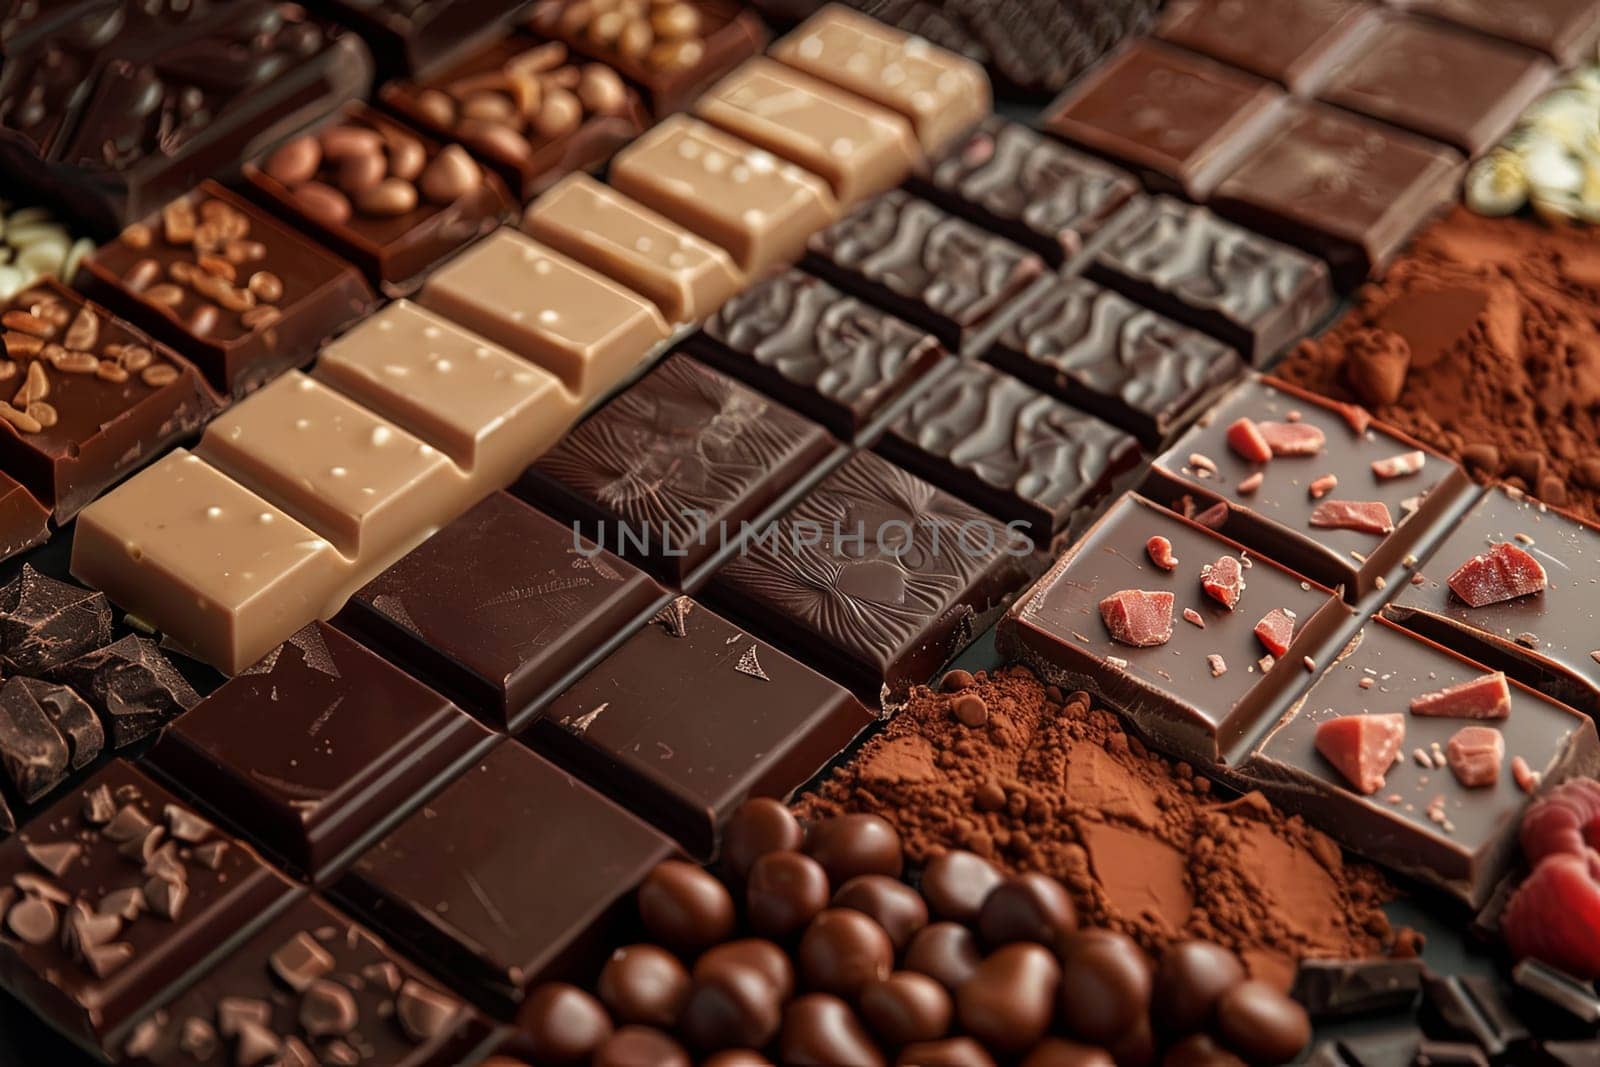 Various chocolate bars in different flavors and types are neatly arranged on a table.